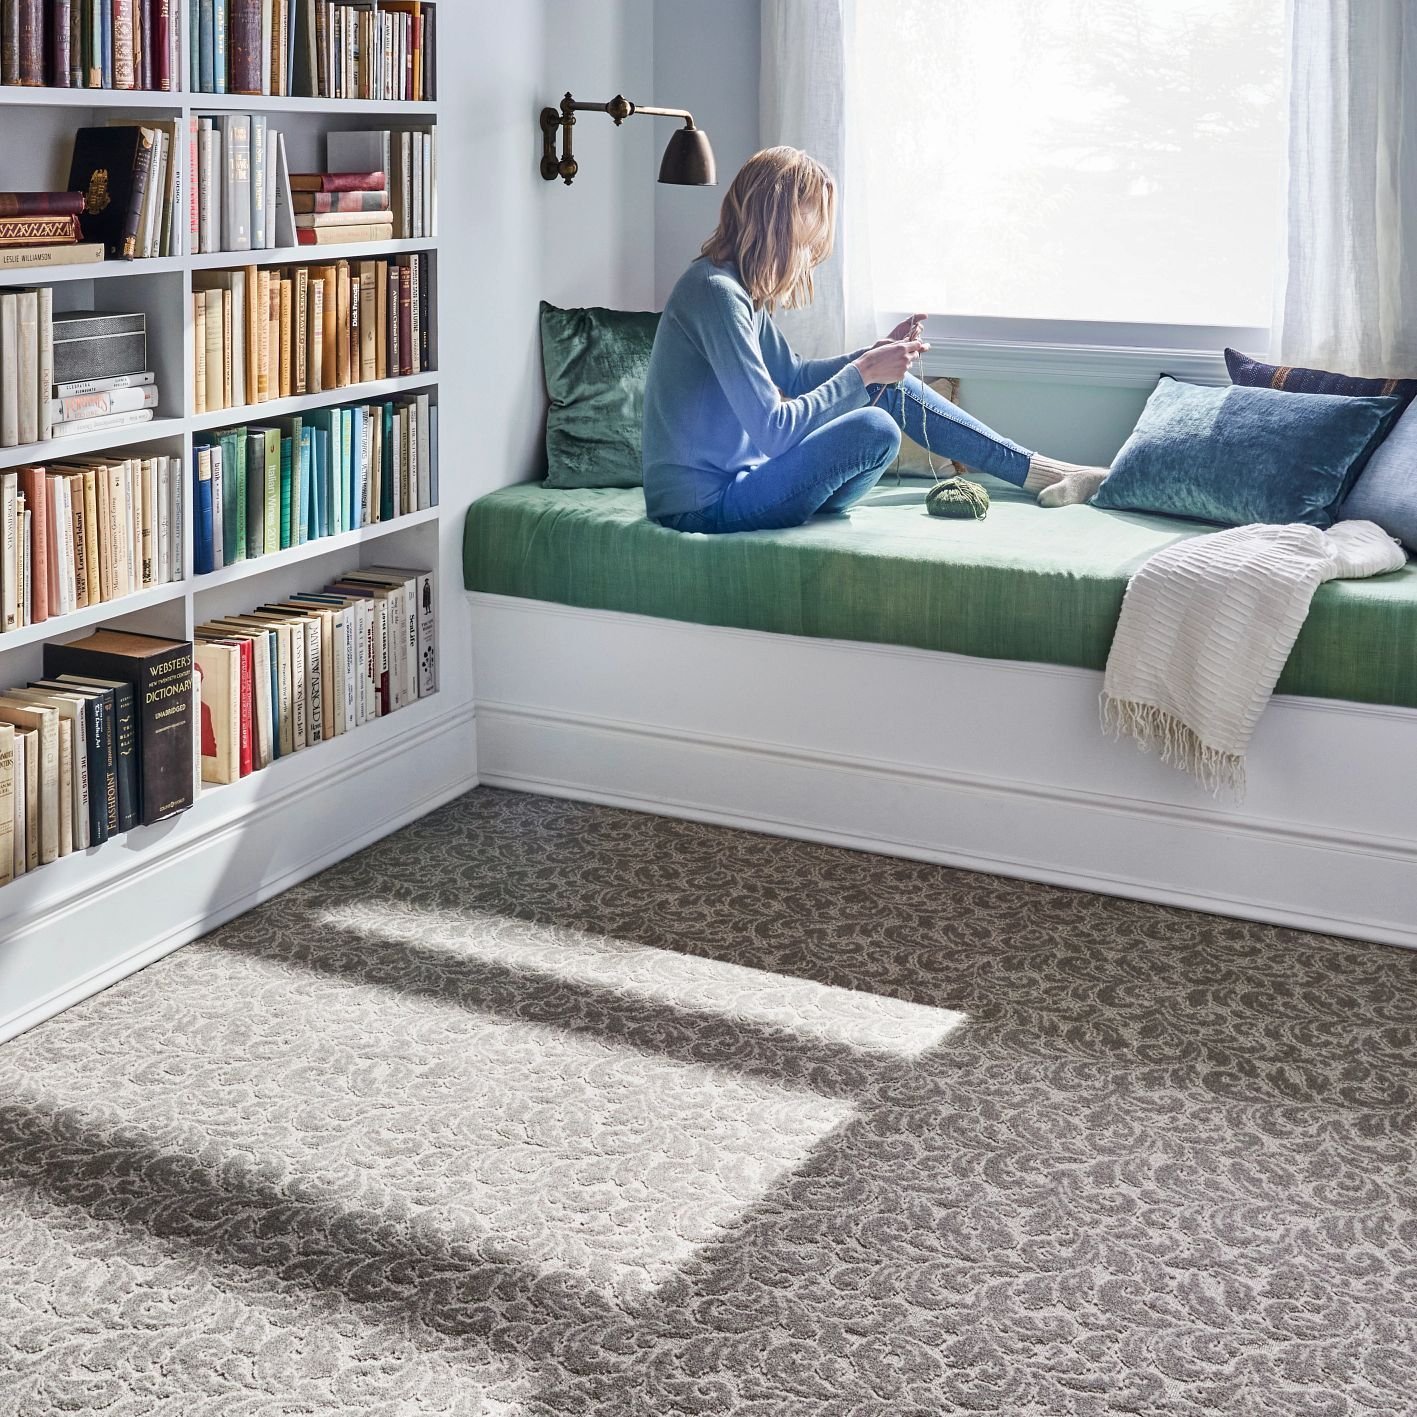 Reading nook in home library with carpet - Carpet World of Martinsburg in WV